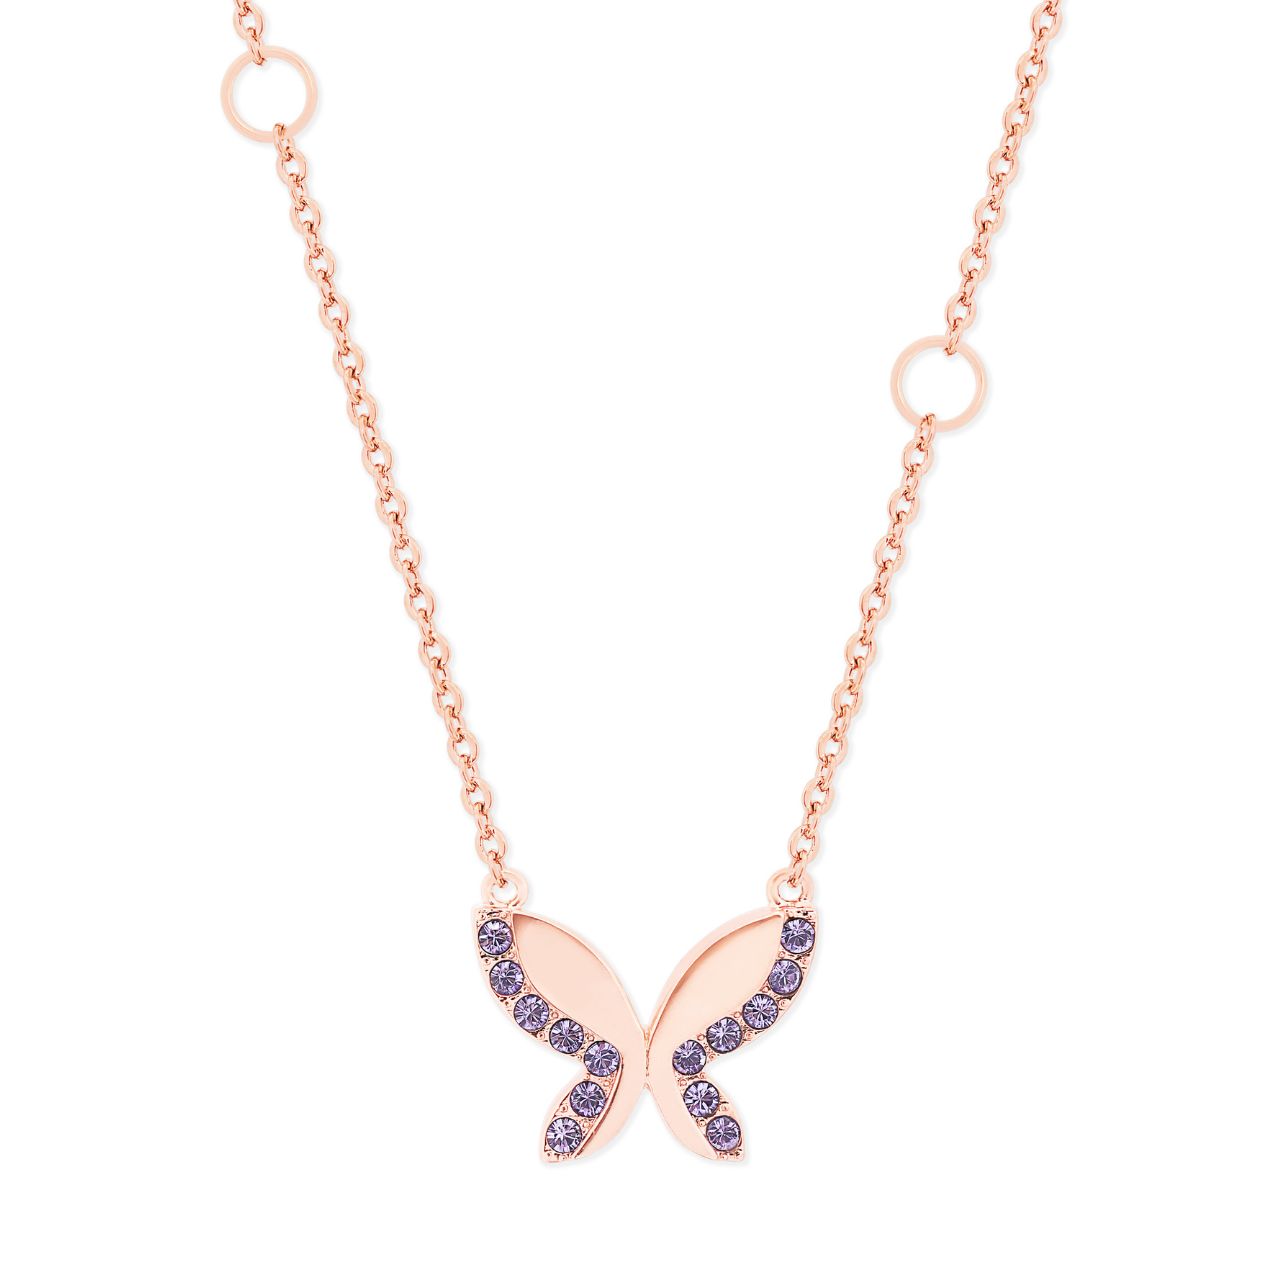 Tipperary Crystal Purple Butterfly Rose Gold Necklace  This pretty butterfly necklace can be worn alone or with matching earrings. Sparkling amethyst czs are set delicately on the wings.